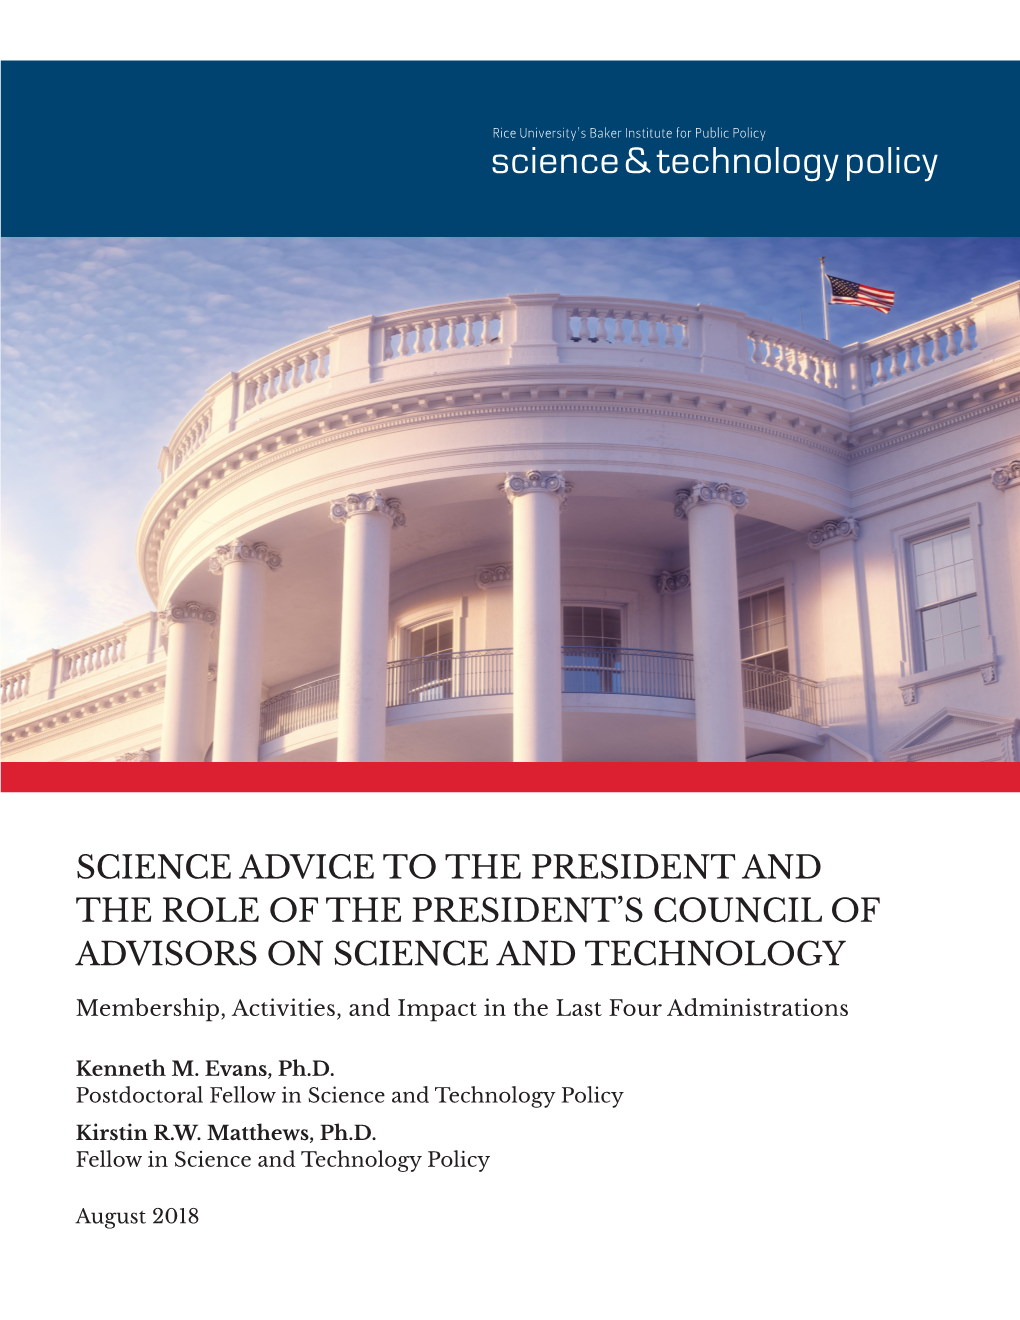 Science Advice to the President and the Role of PCAST